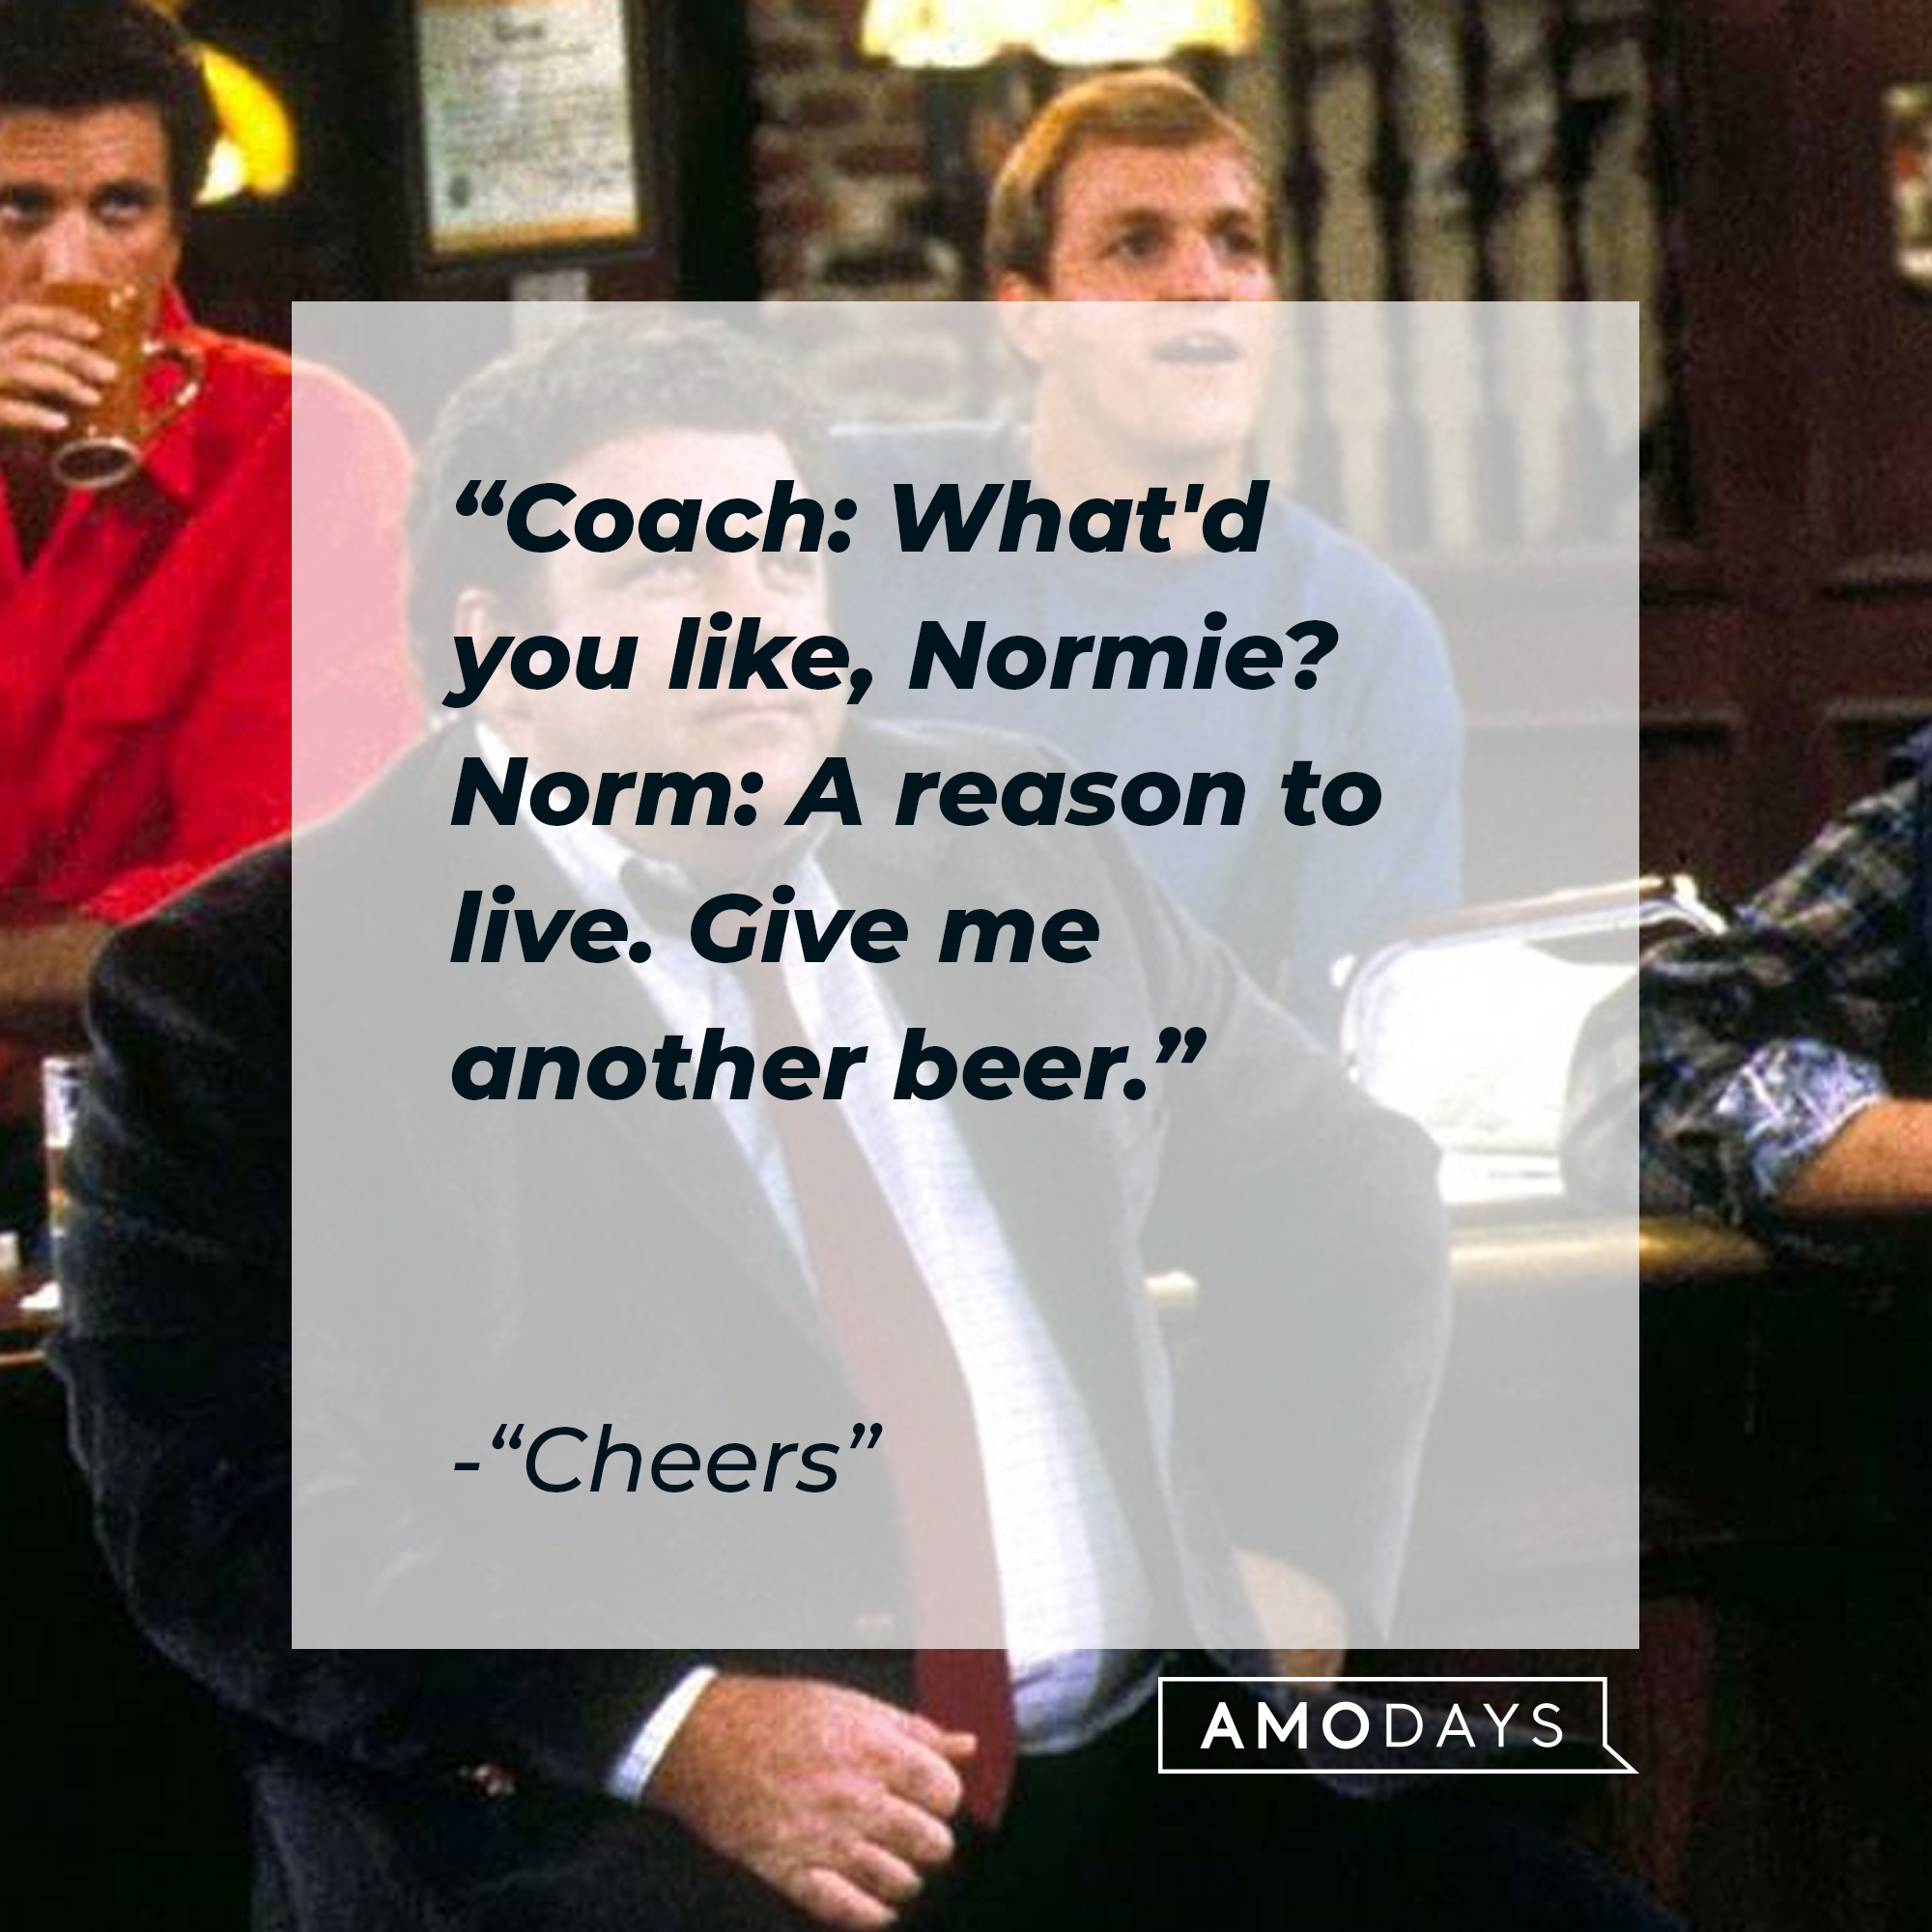 Norm Peterson with his quote: "Coach: What'd you like, Normie? ; Norm: A reason to live. Give me another beer." | Source: Facebook.com/Cheers